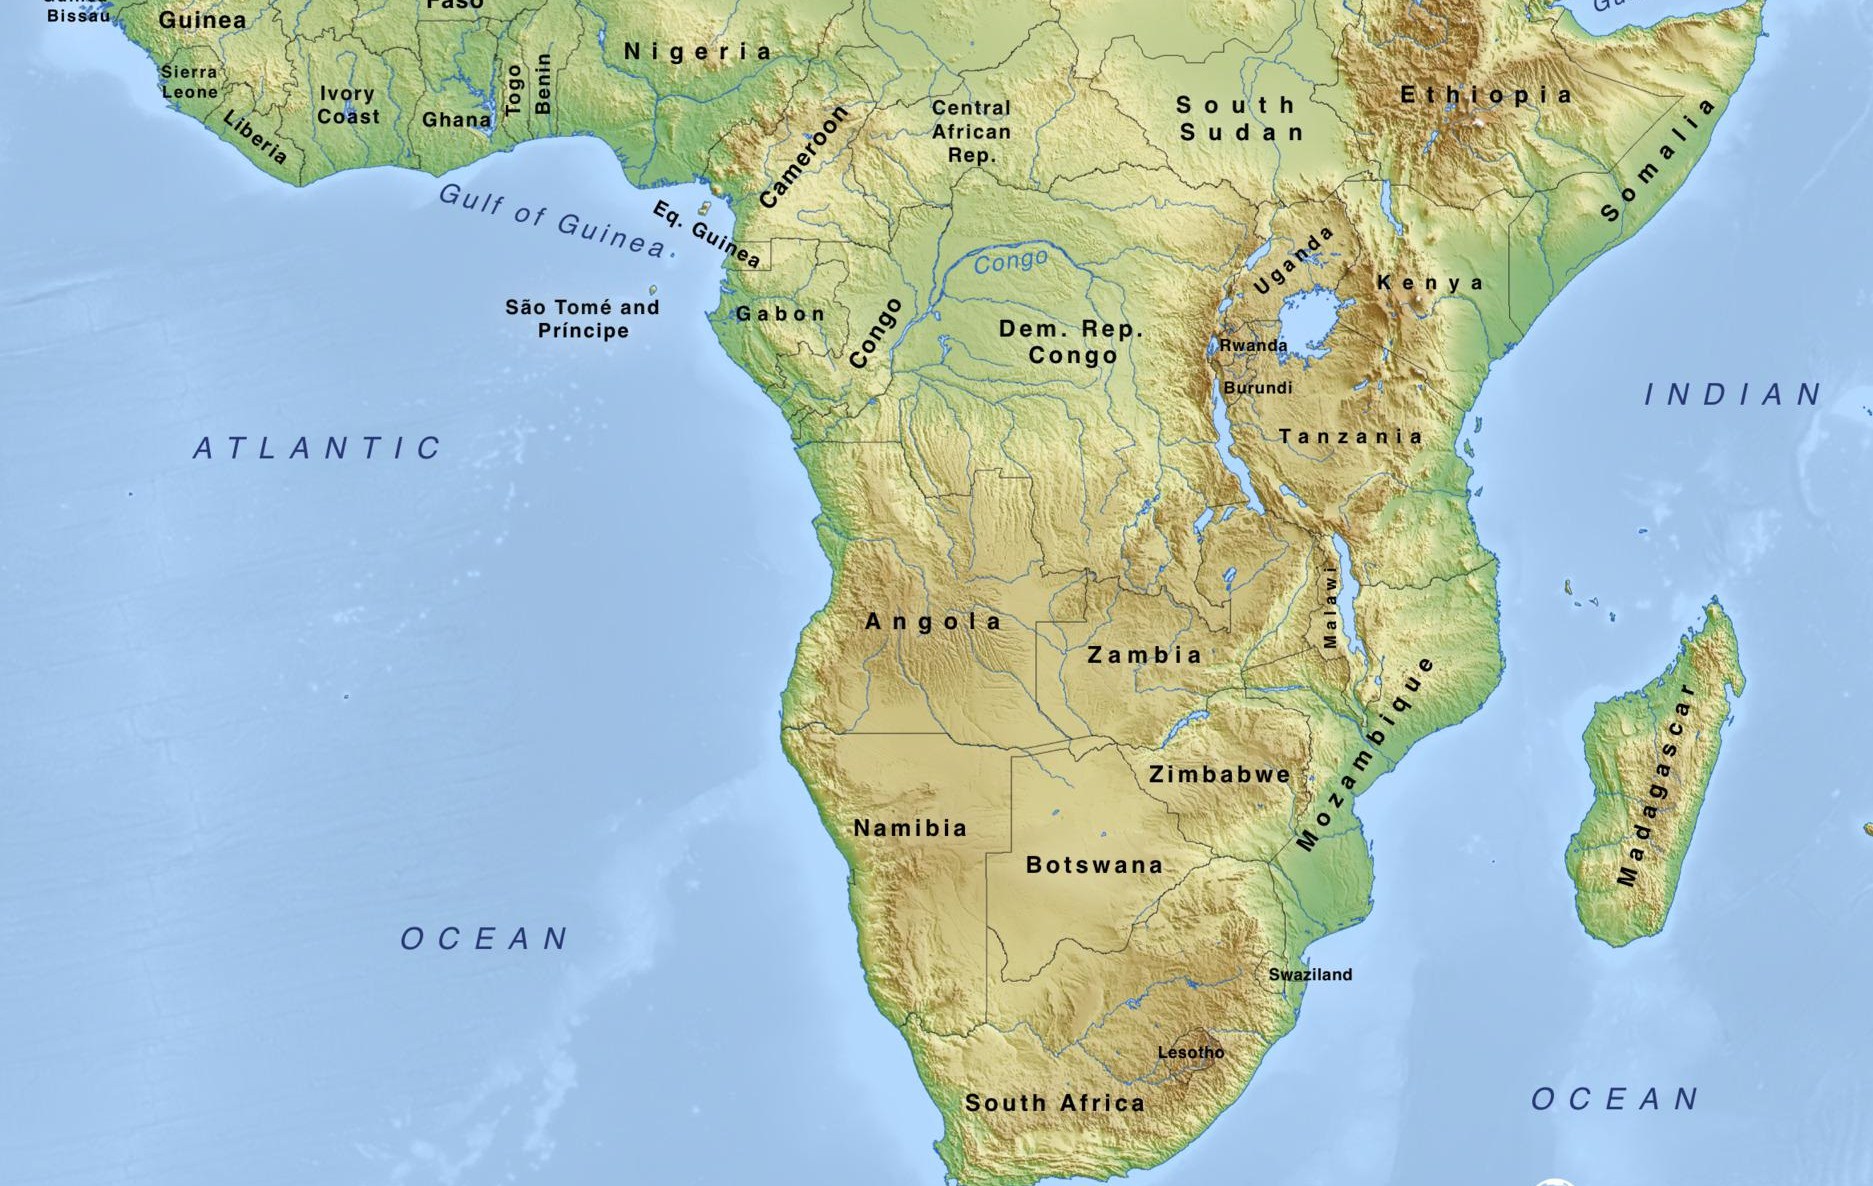 Map of Africa south of the Sahara